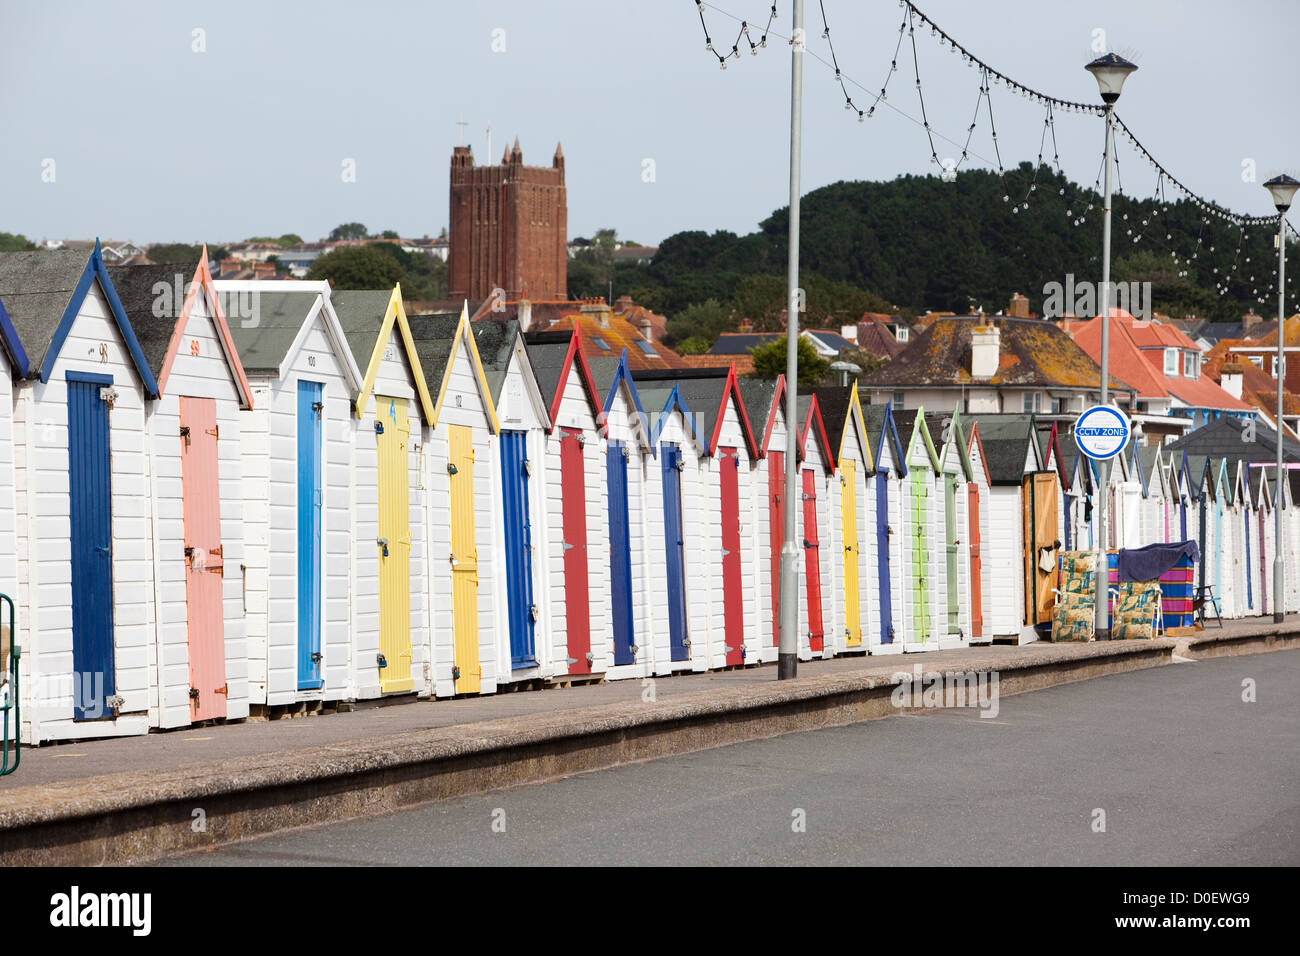 Line of small wood houses in the seafront of Torquay, England Stock Photo